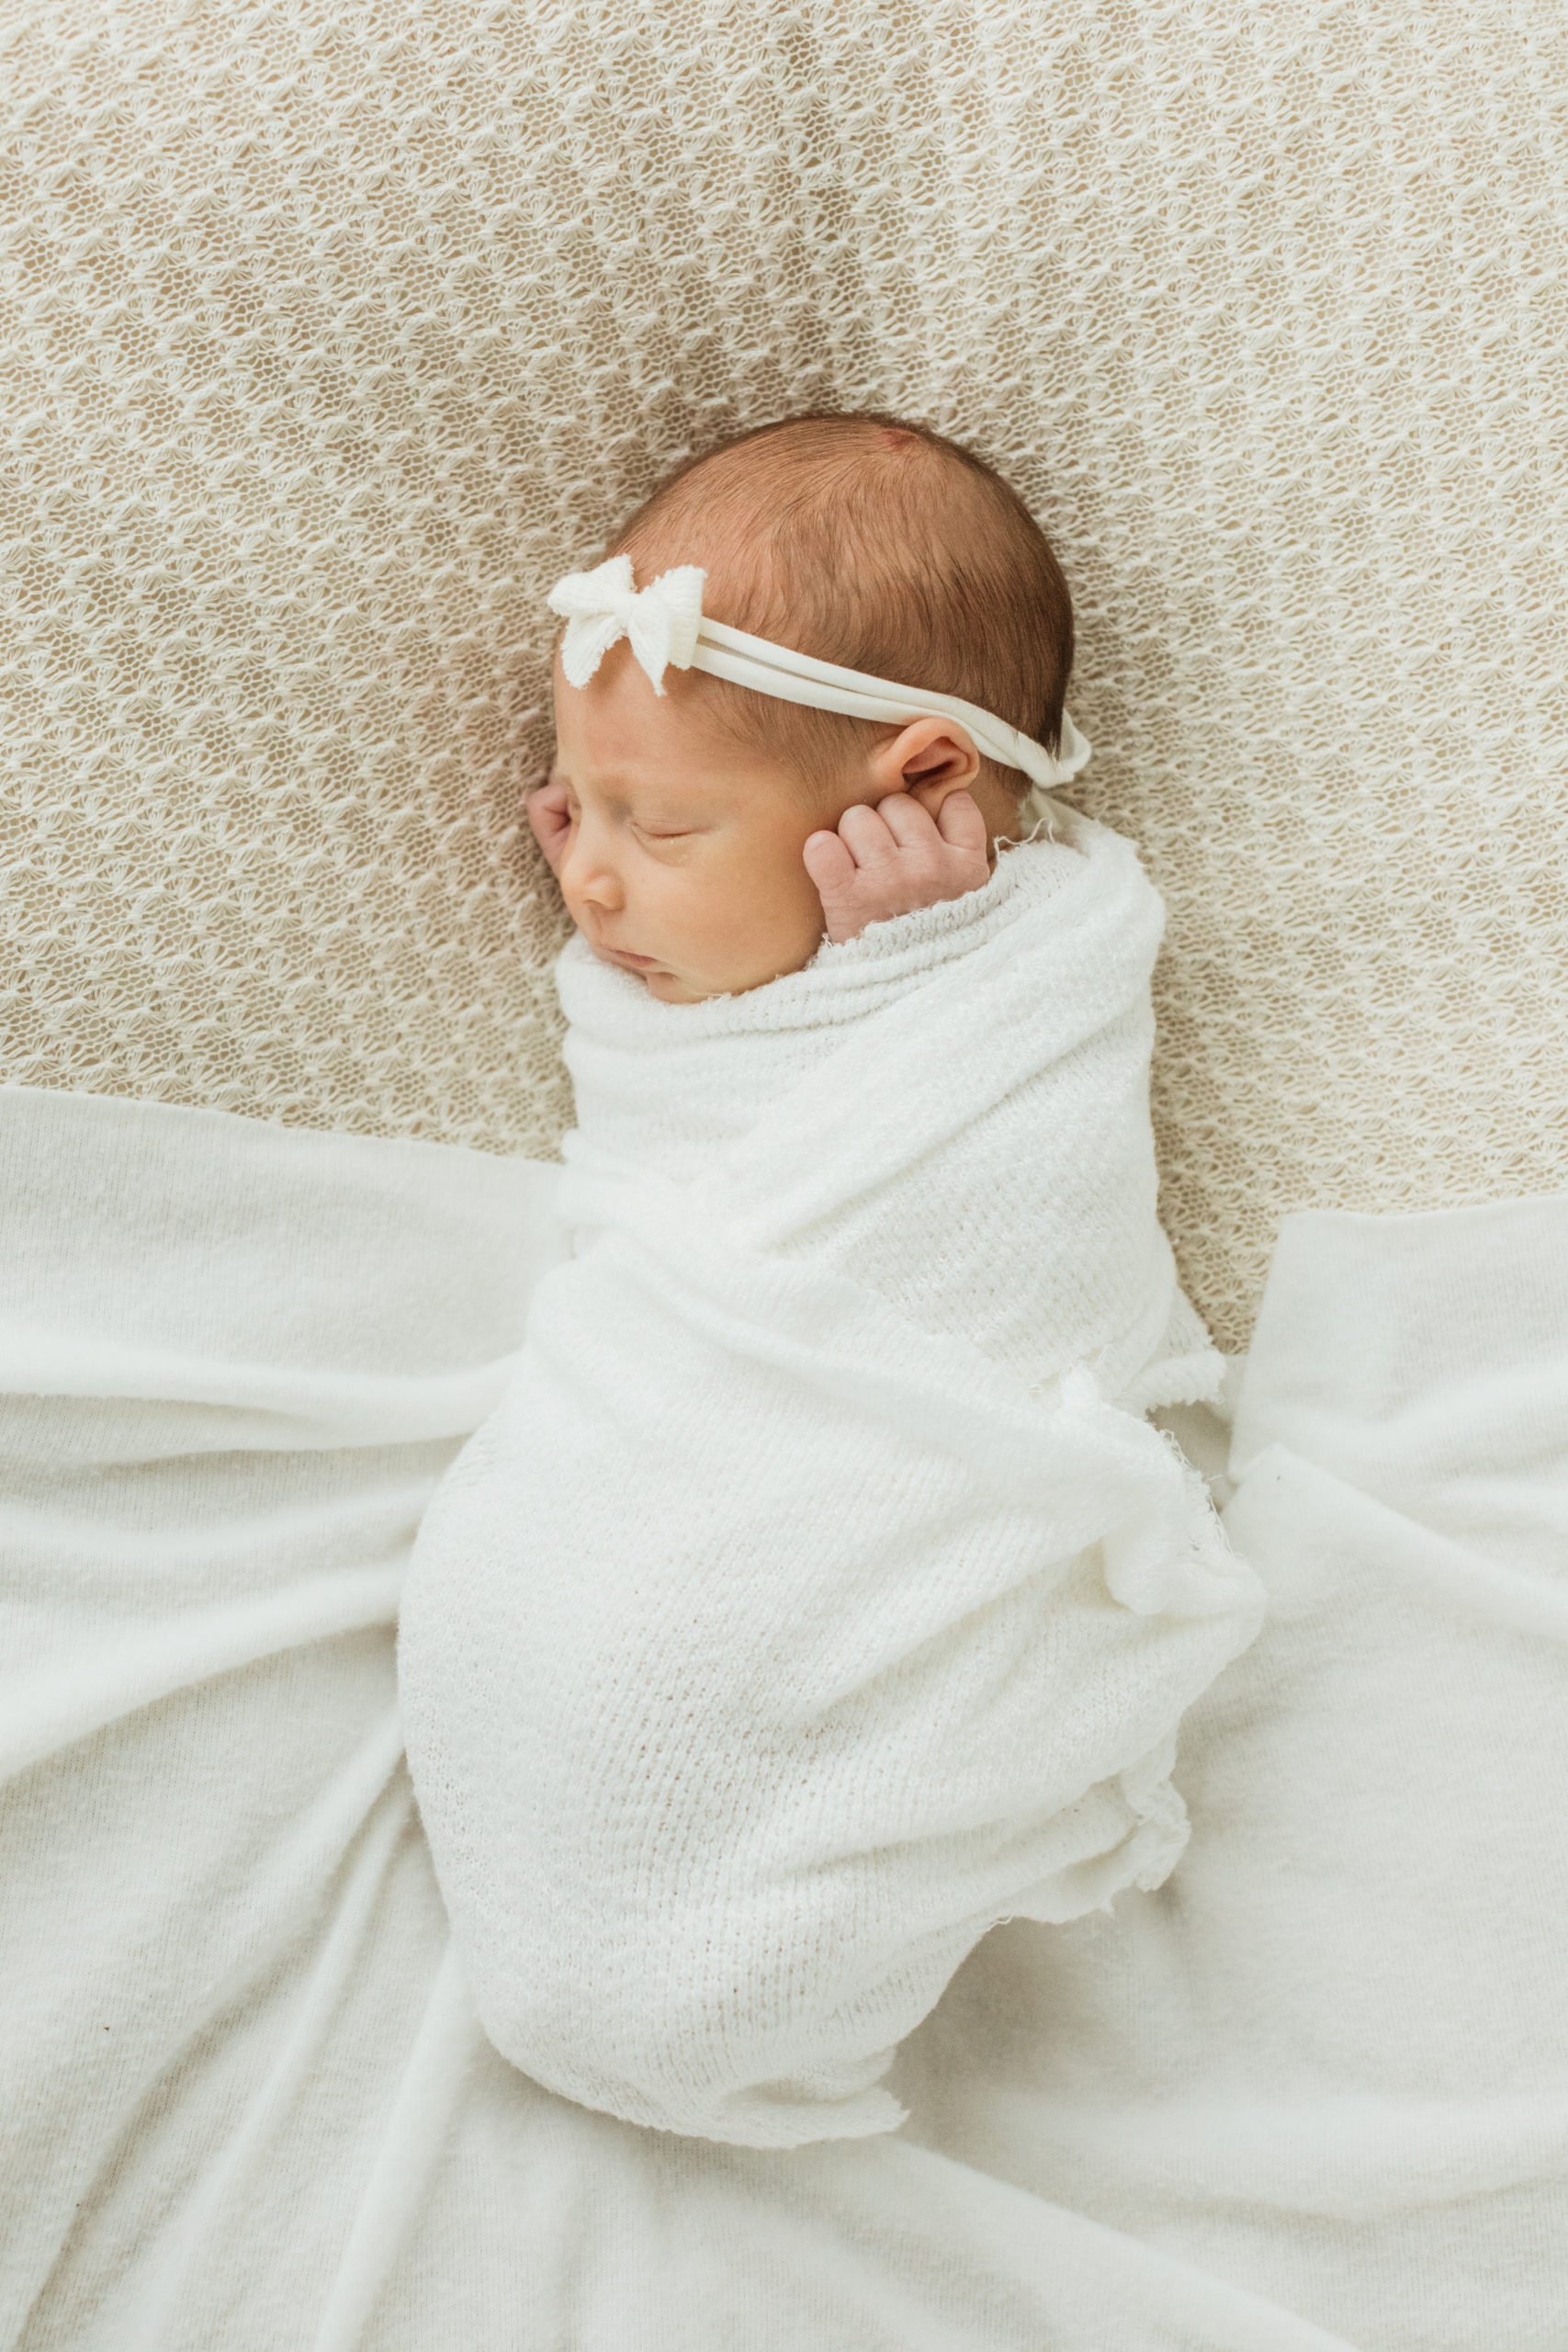 Sleepy newborn baby girl wrapped in white blanket in white bed with white headband.